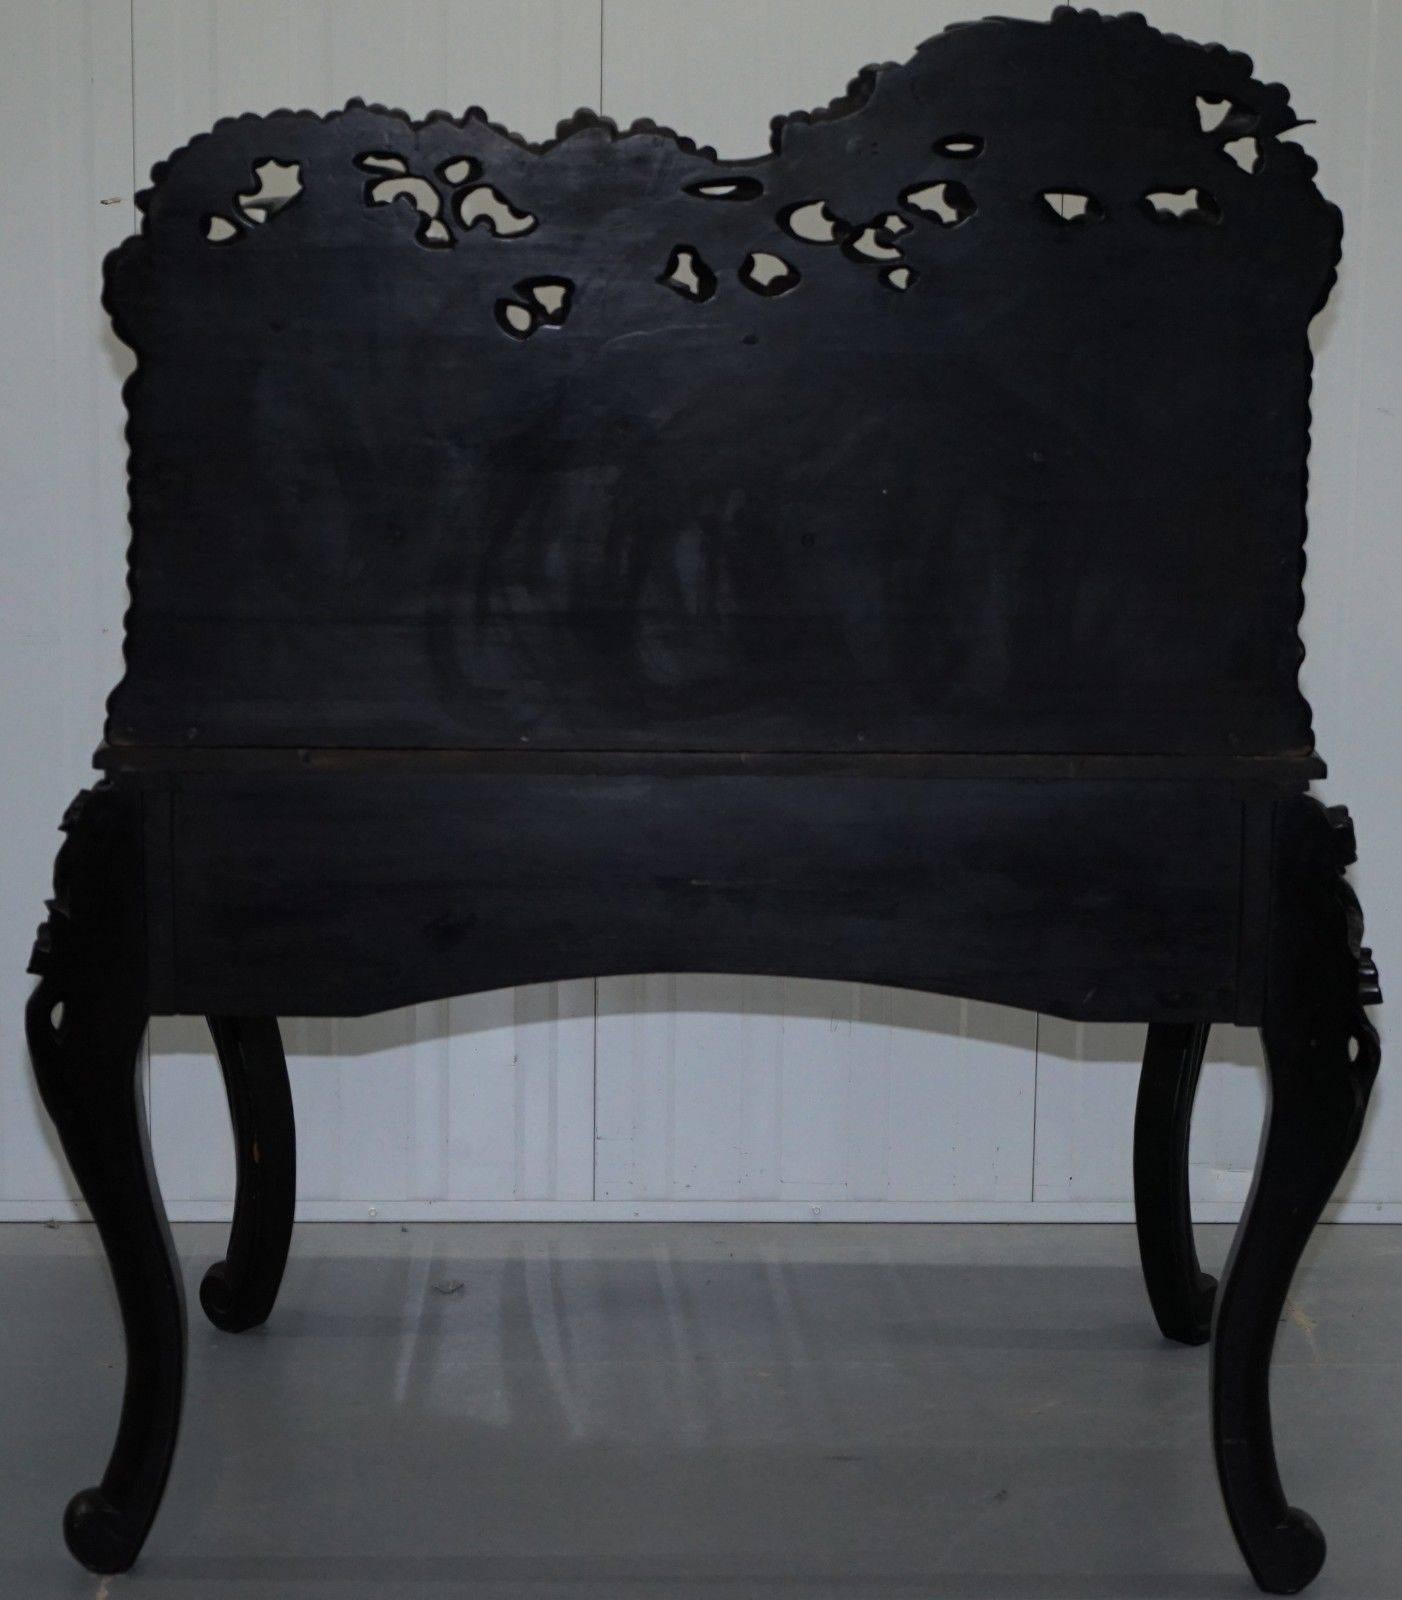 Rare circa 1900 Chinese Export Hand-Carved Writing Desk Ebonized Black Lacquer 3